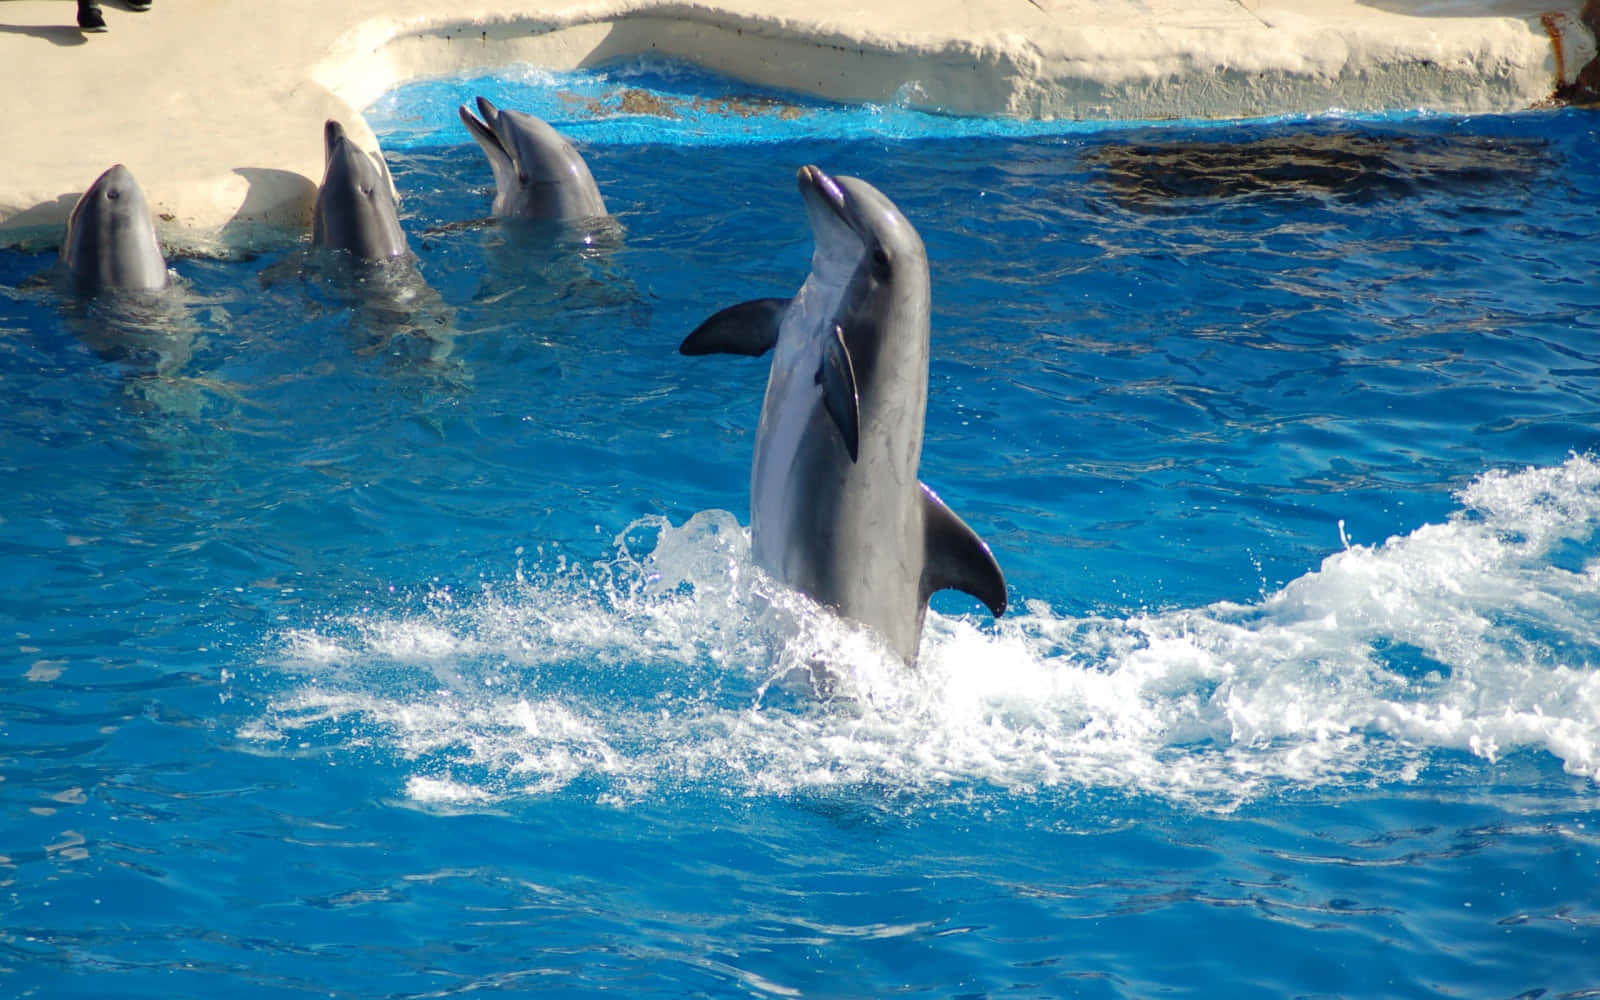 A pod of dolphins glides through the crystal-clear waters of the Caribbean Sea.